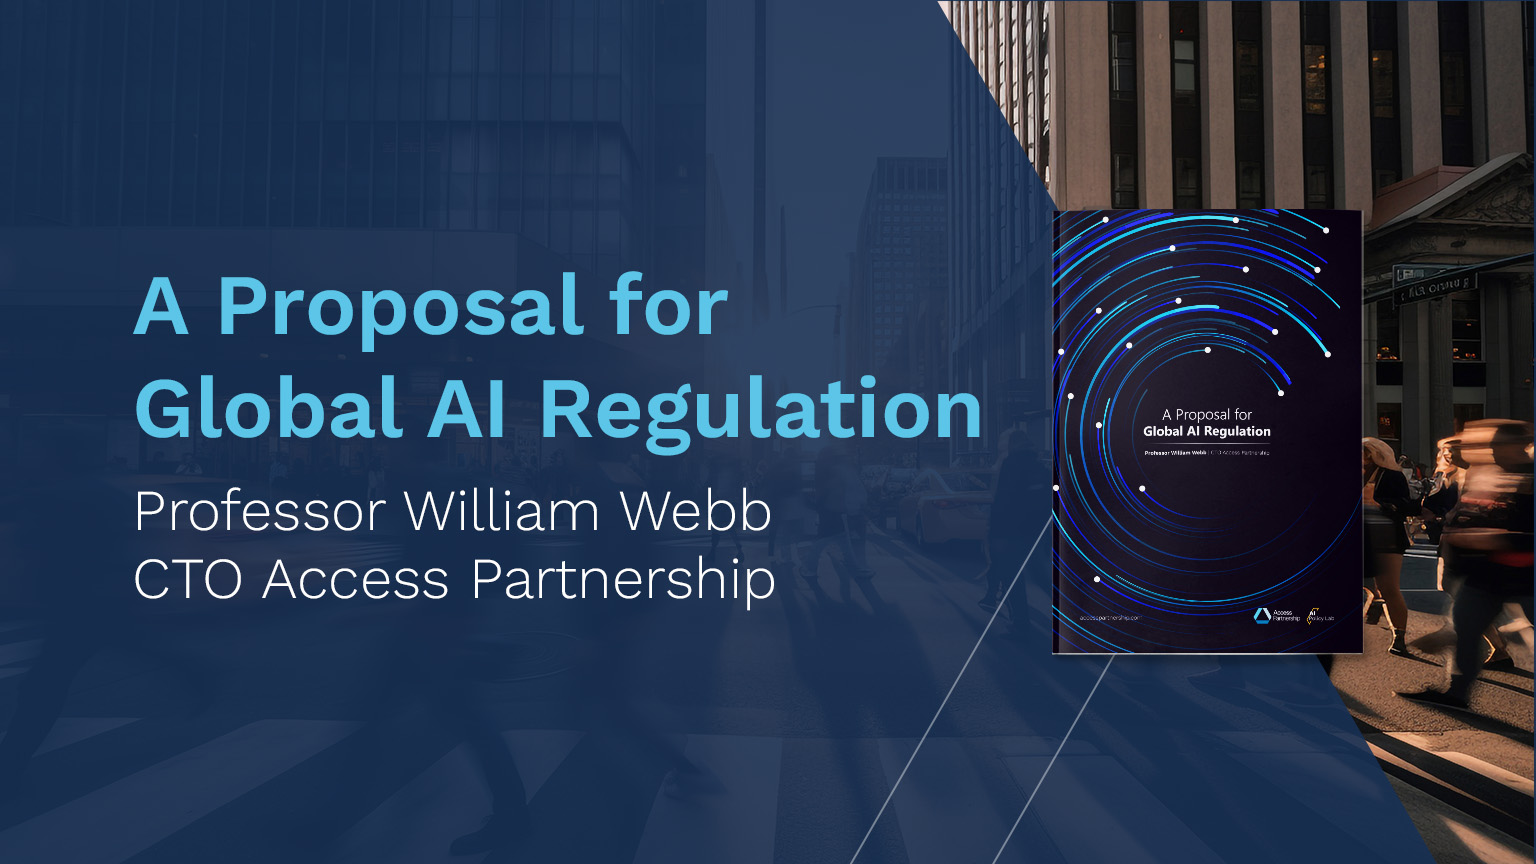 A Proposal for Global AI Regulation